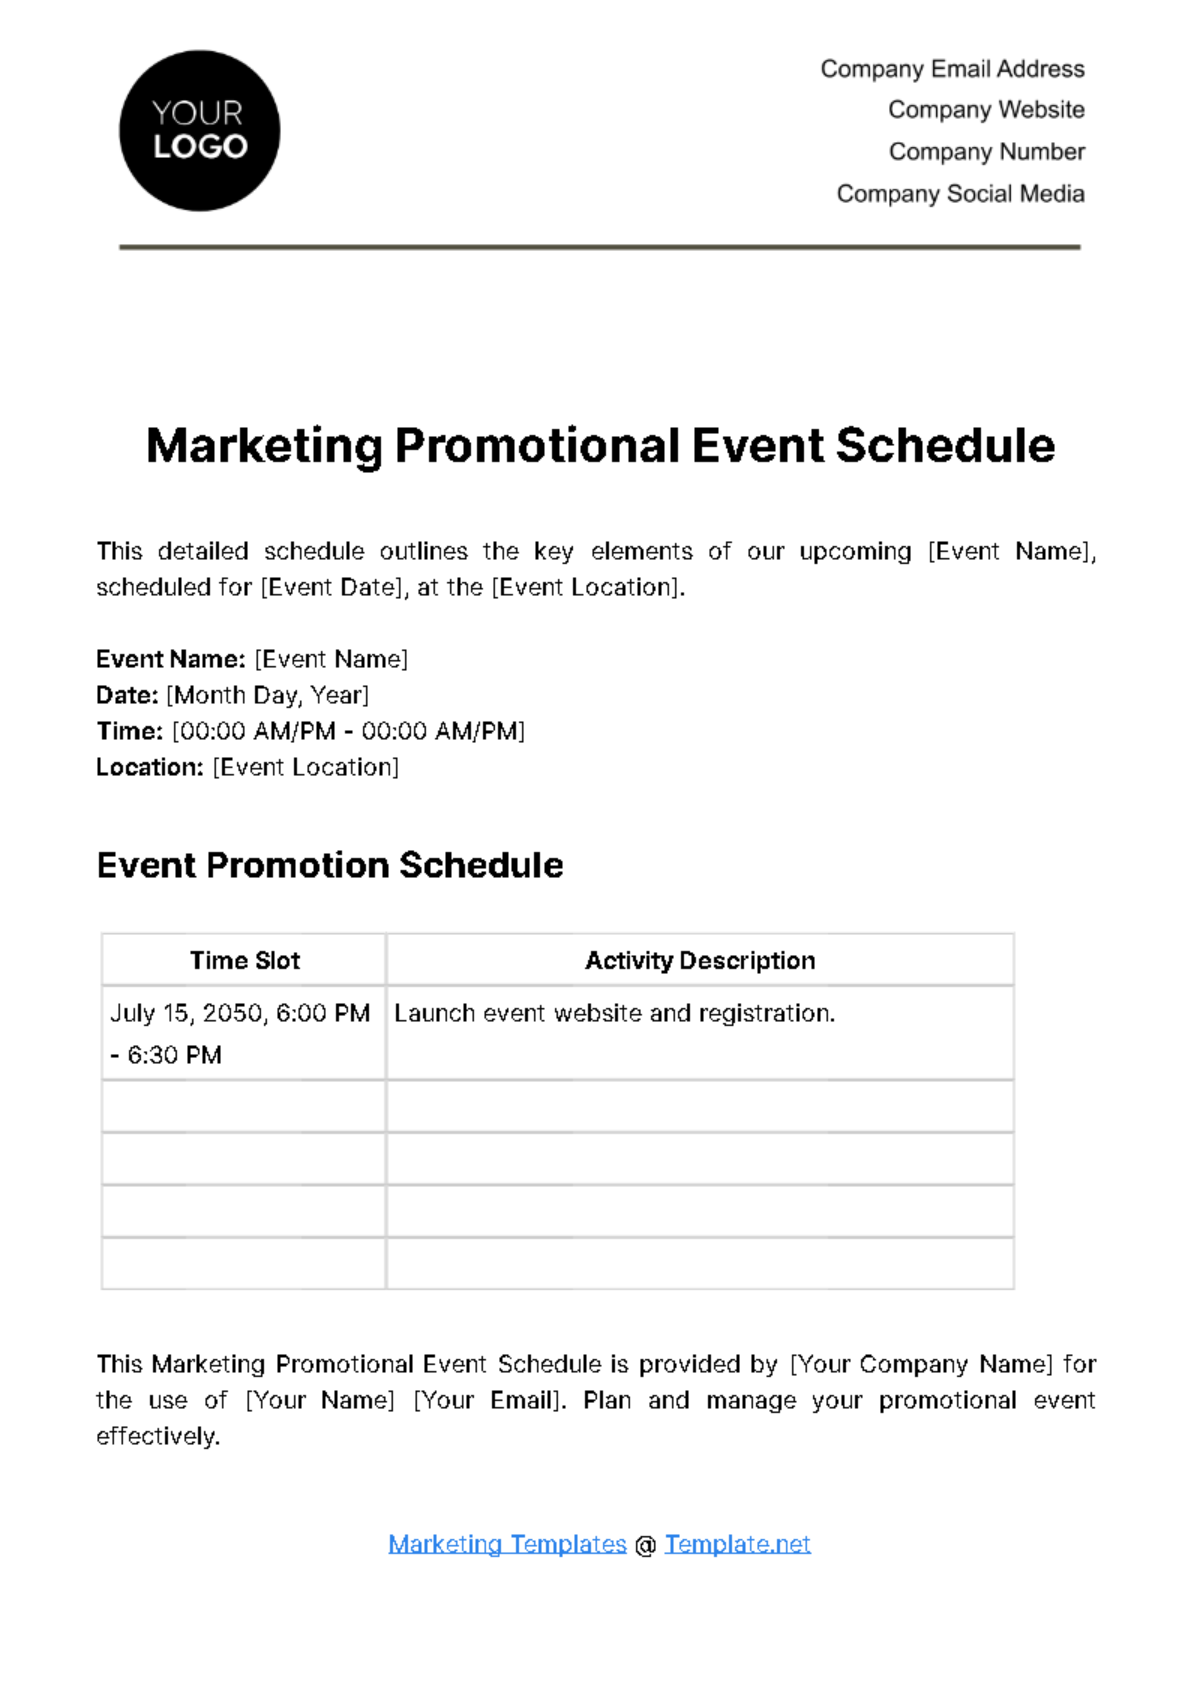 Marketing Promotional Event Schedule Template